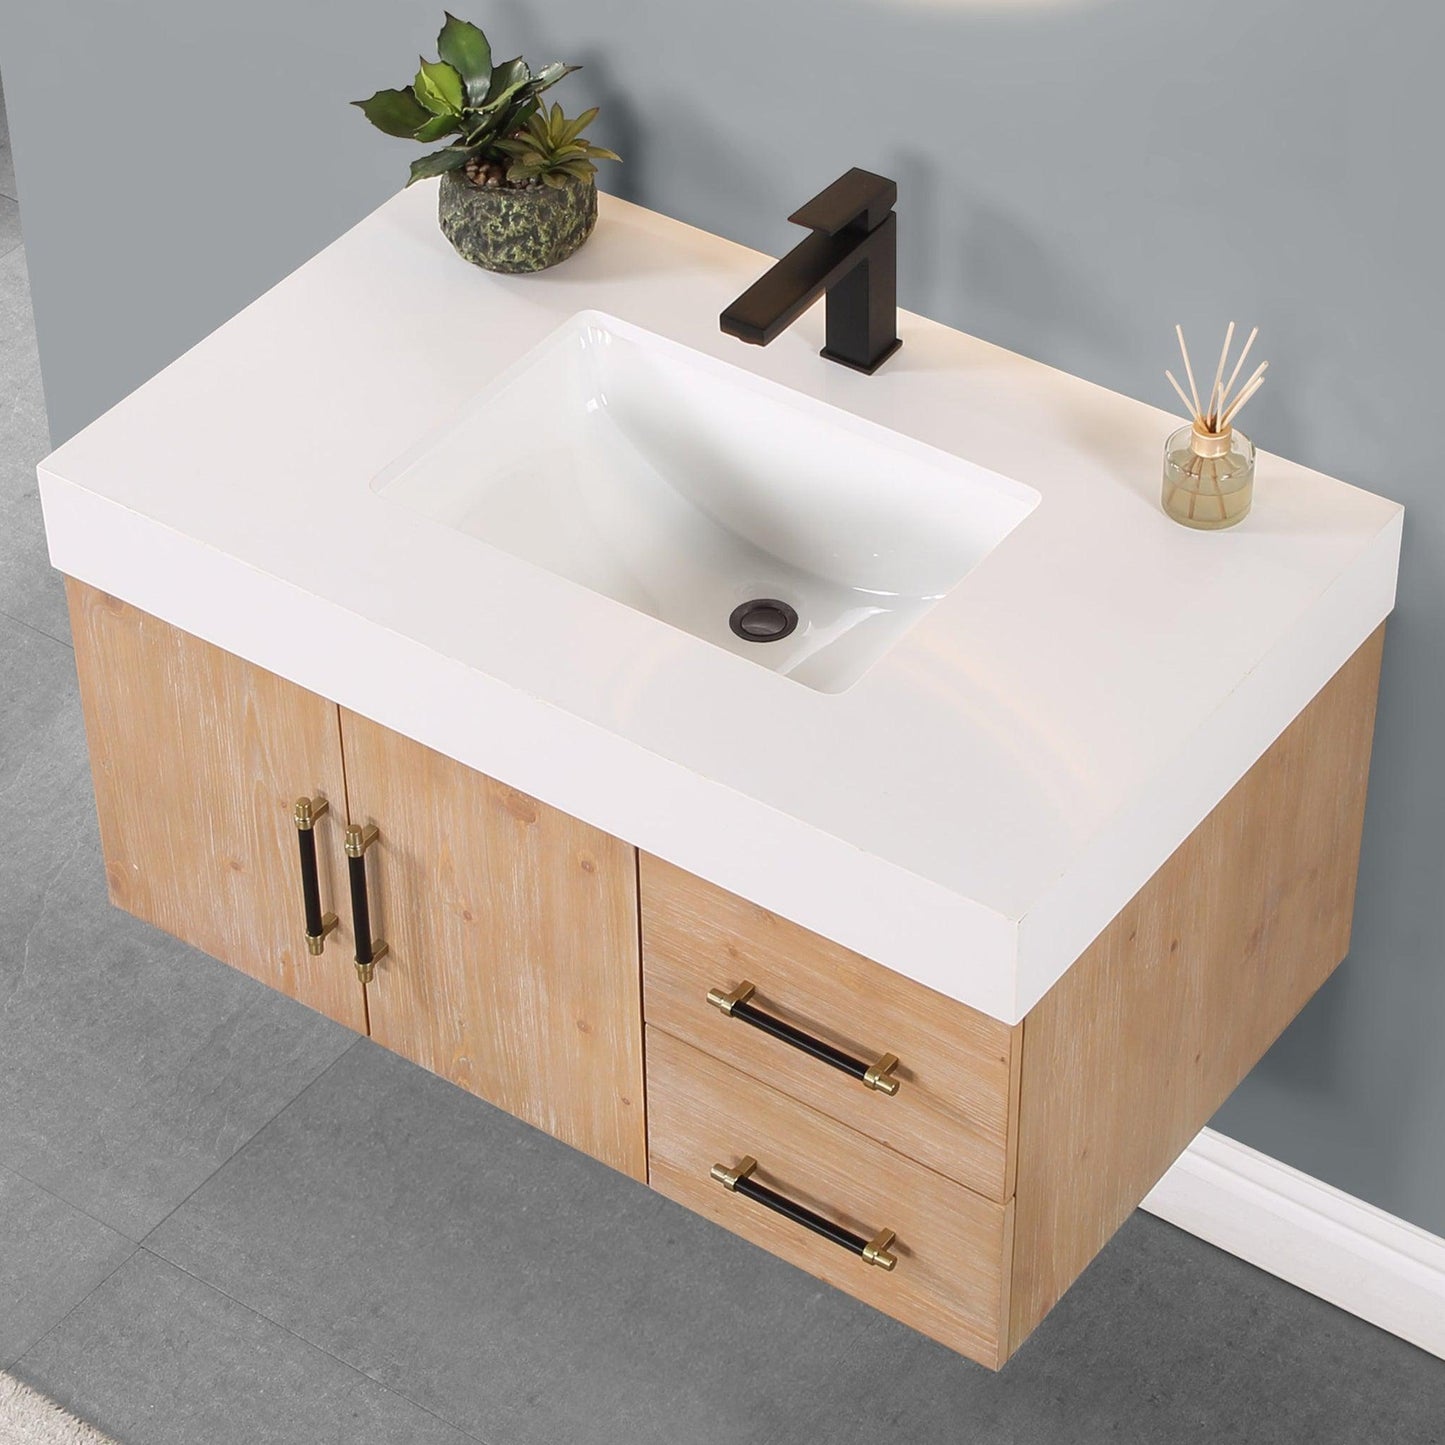 Altair Corchia 36" Light Brown Wall-Mounted Single Bathroom Vanity Set With White Composite Stone Top, Single Rectangular Undermount Ceramic Sink, and Overflow